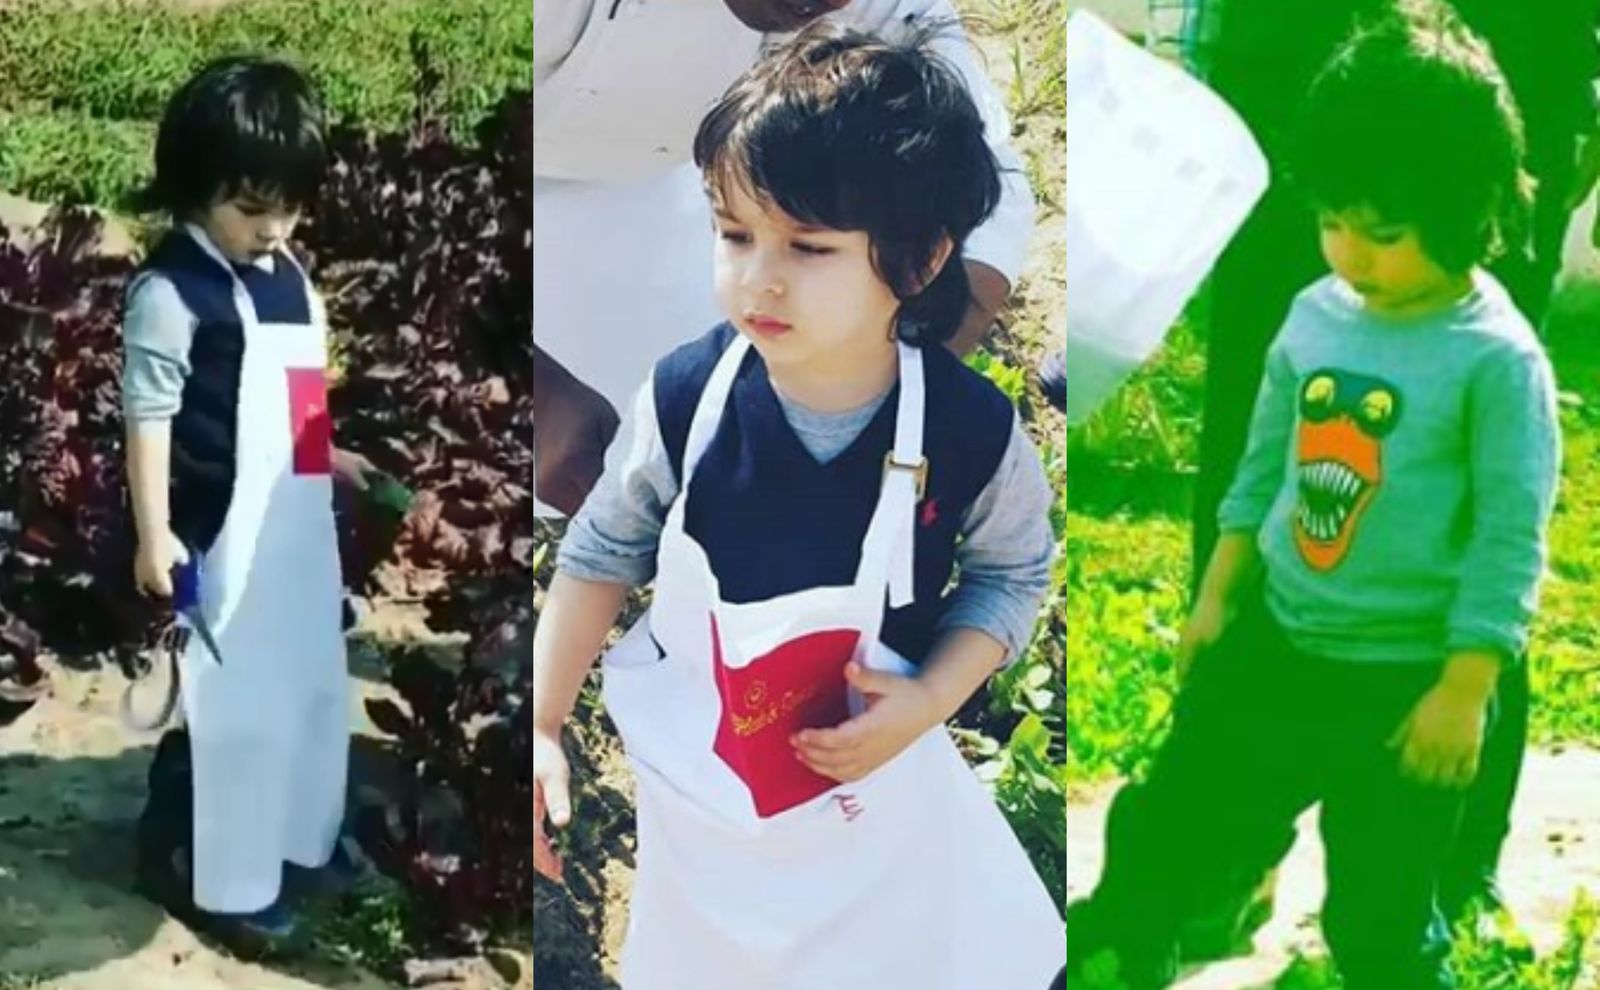 Taimur Ali Khan Looks Adorable As He Plucks Vegetables From A Farm In Chandigarh; Watch